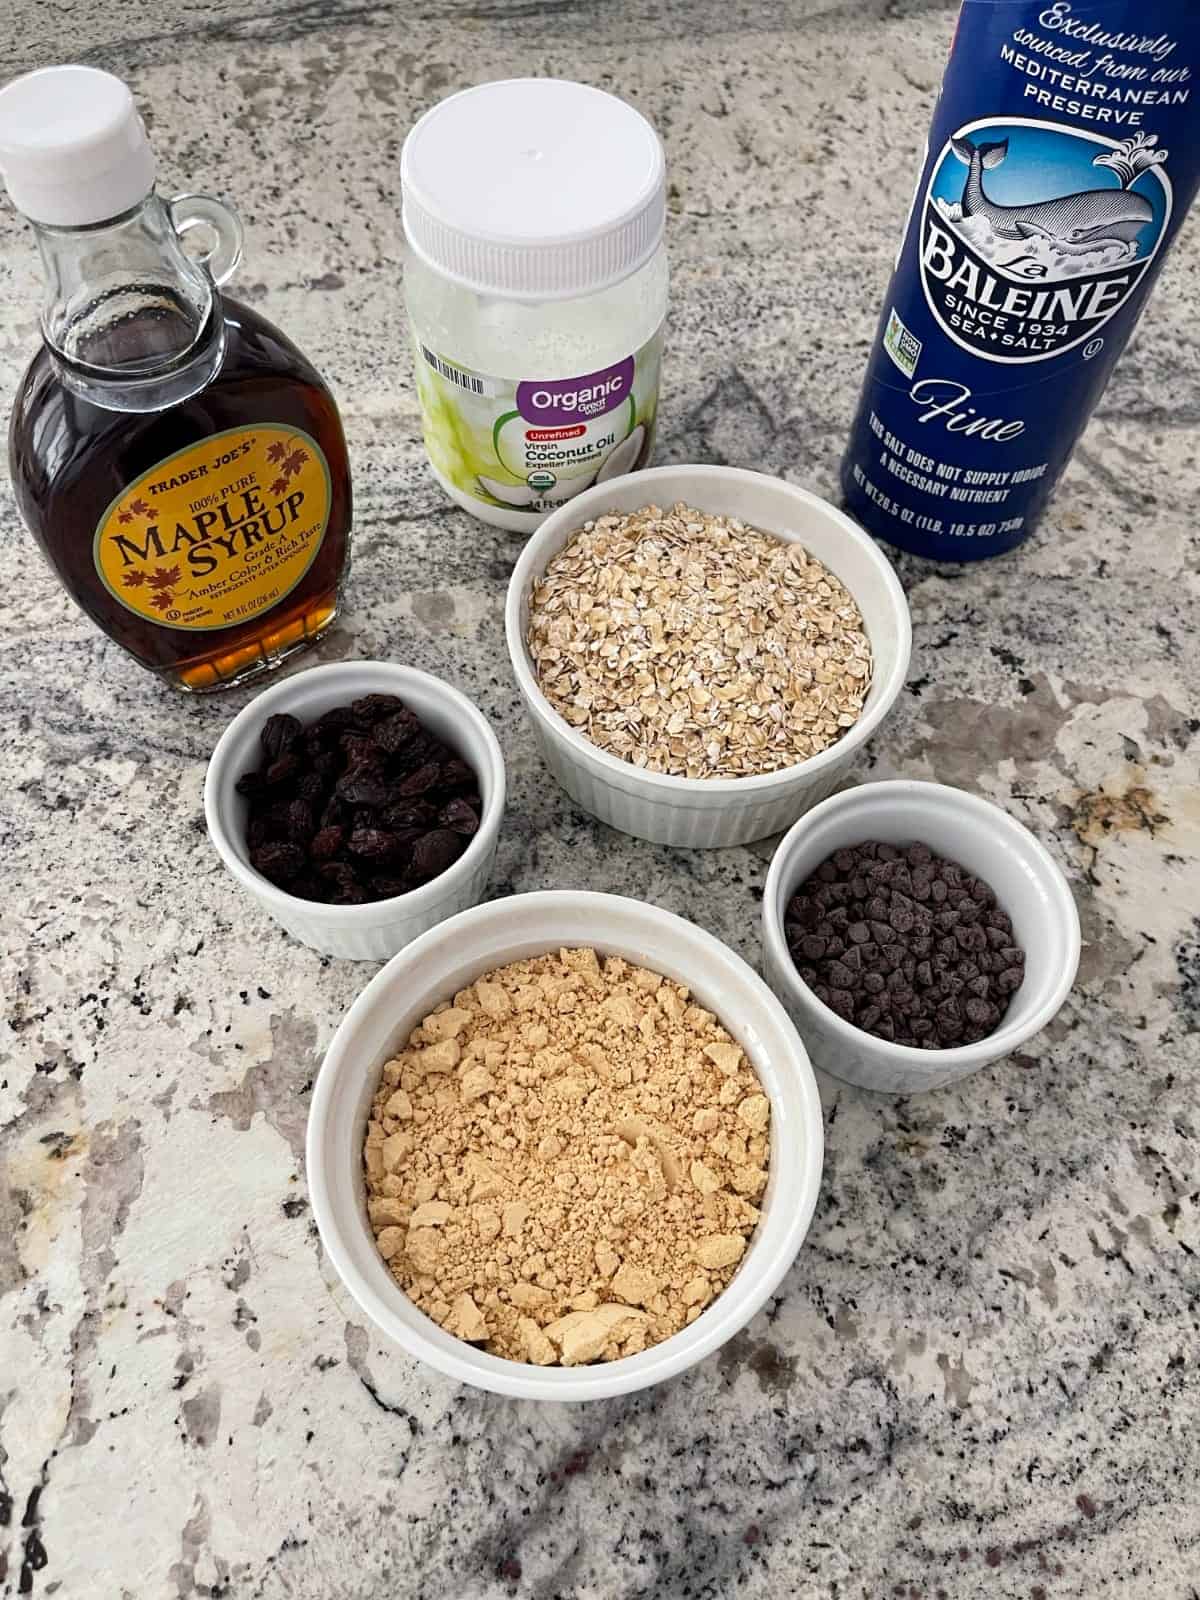 Ingredients including maple syrup, coconut oil, sea salt, oats, raisins, mini chocolate chips and powdered peanut butter.